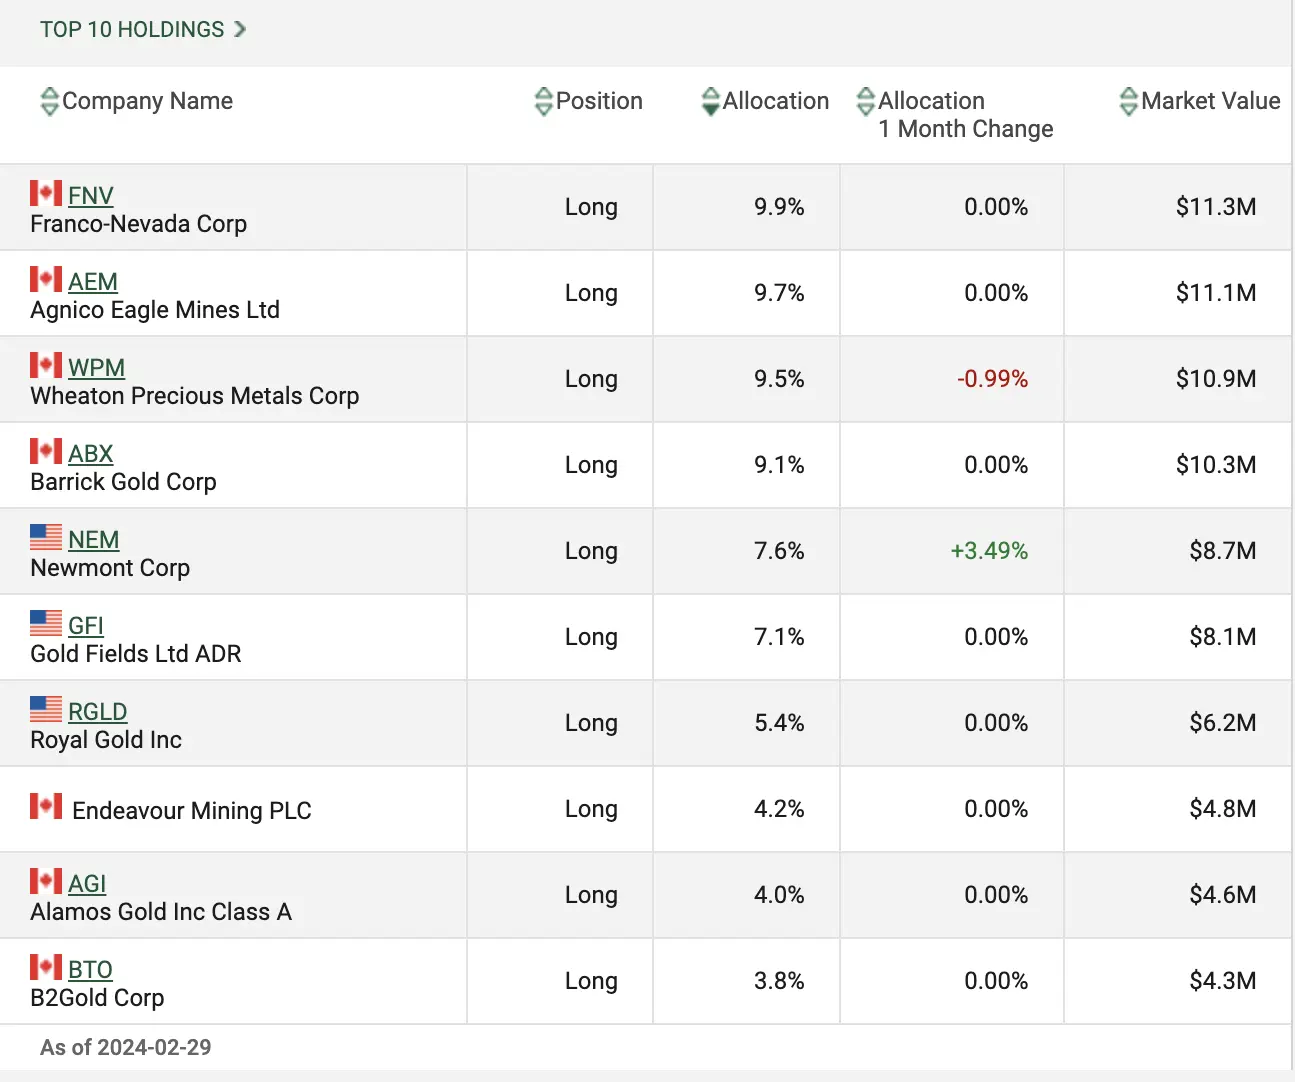 TD Precious Metals Fund's top holdings as of March 2024.